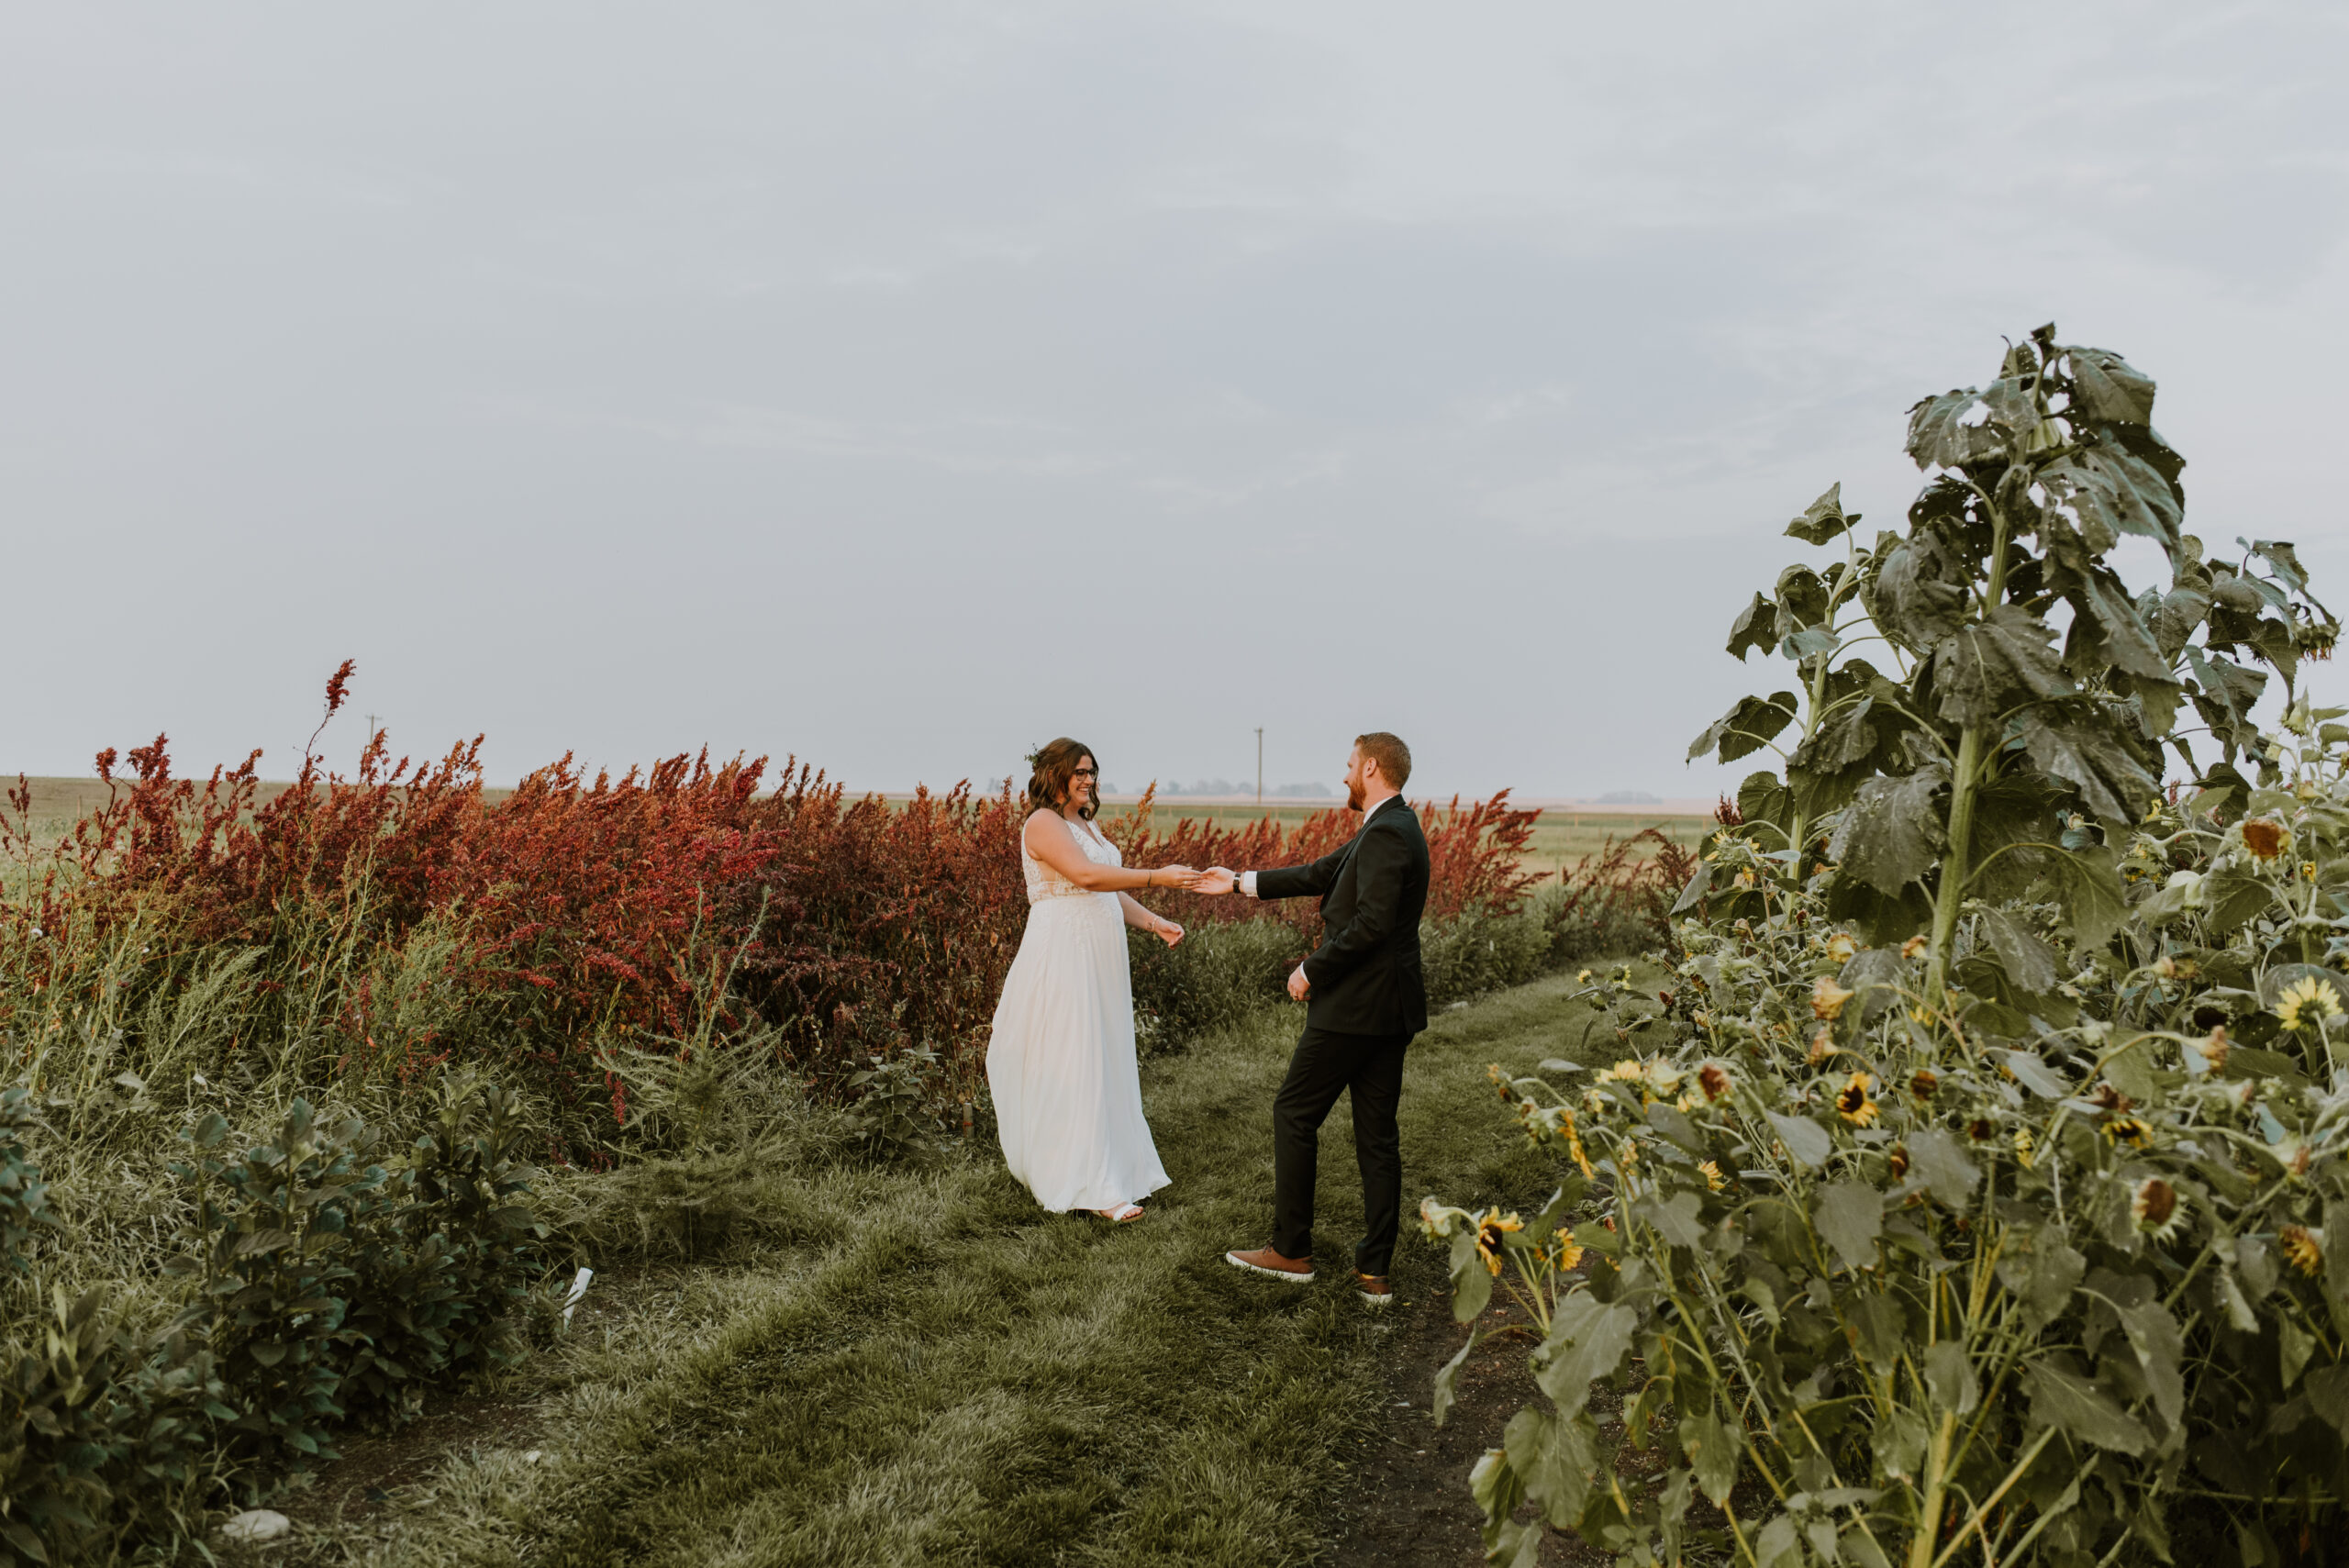 A bride and groom standing in a field of sunflowers.